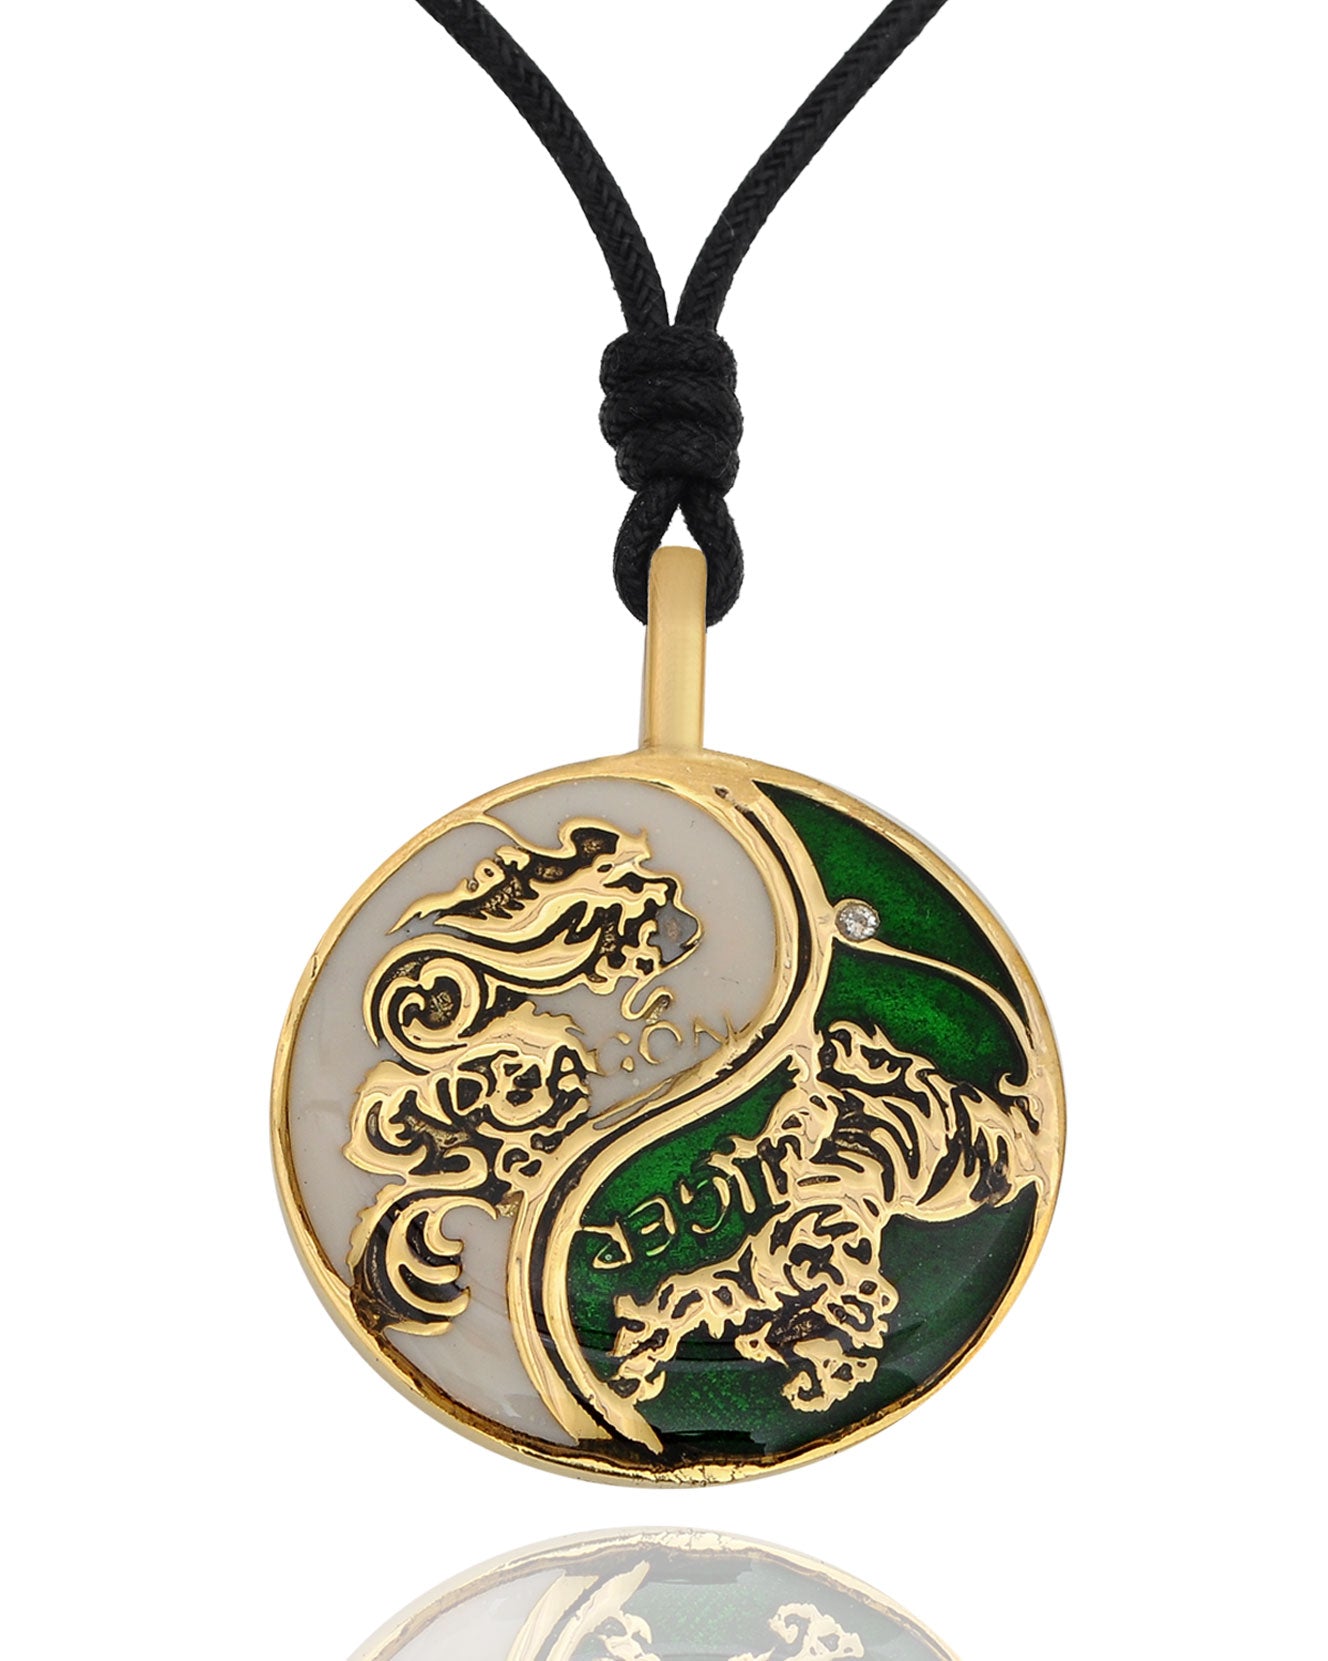 Tiger Dragon Colorful Yin Yang Handmade Brass Necklace Pendant Feng Shui Jewelry